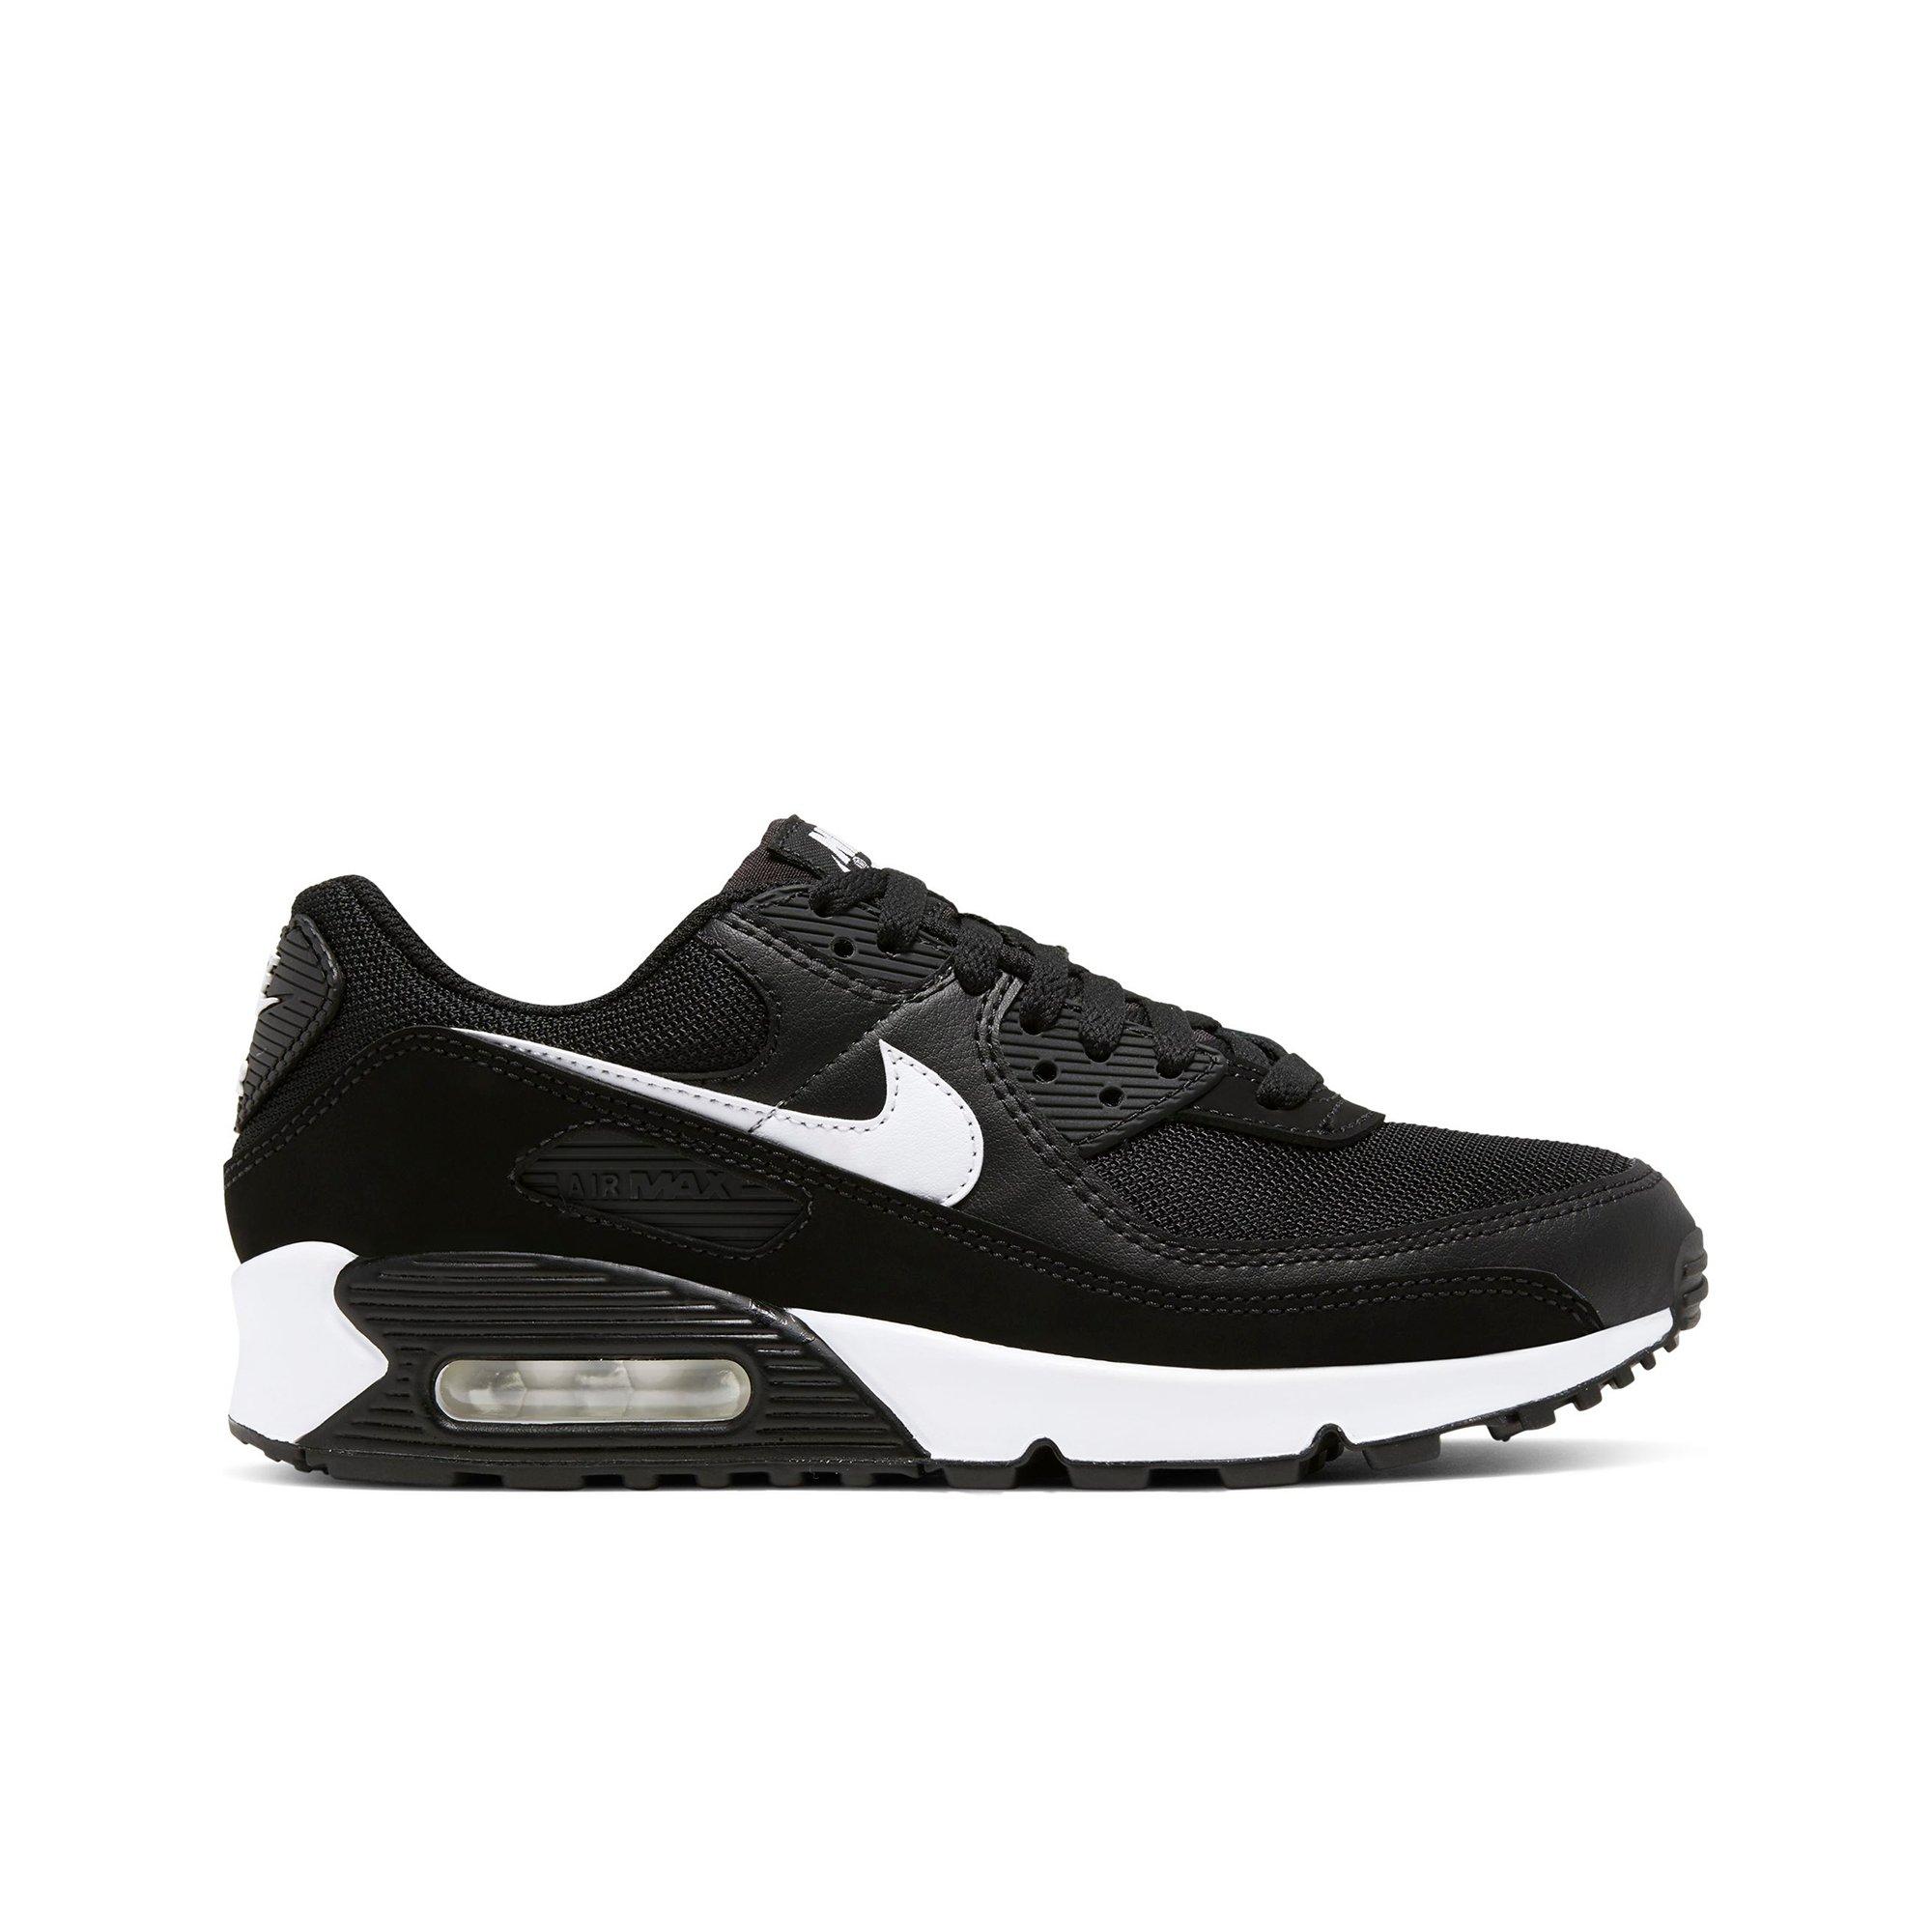 women's black and white air max